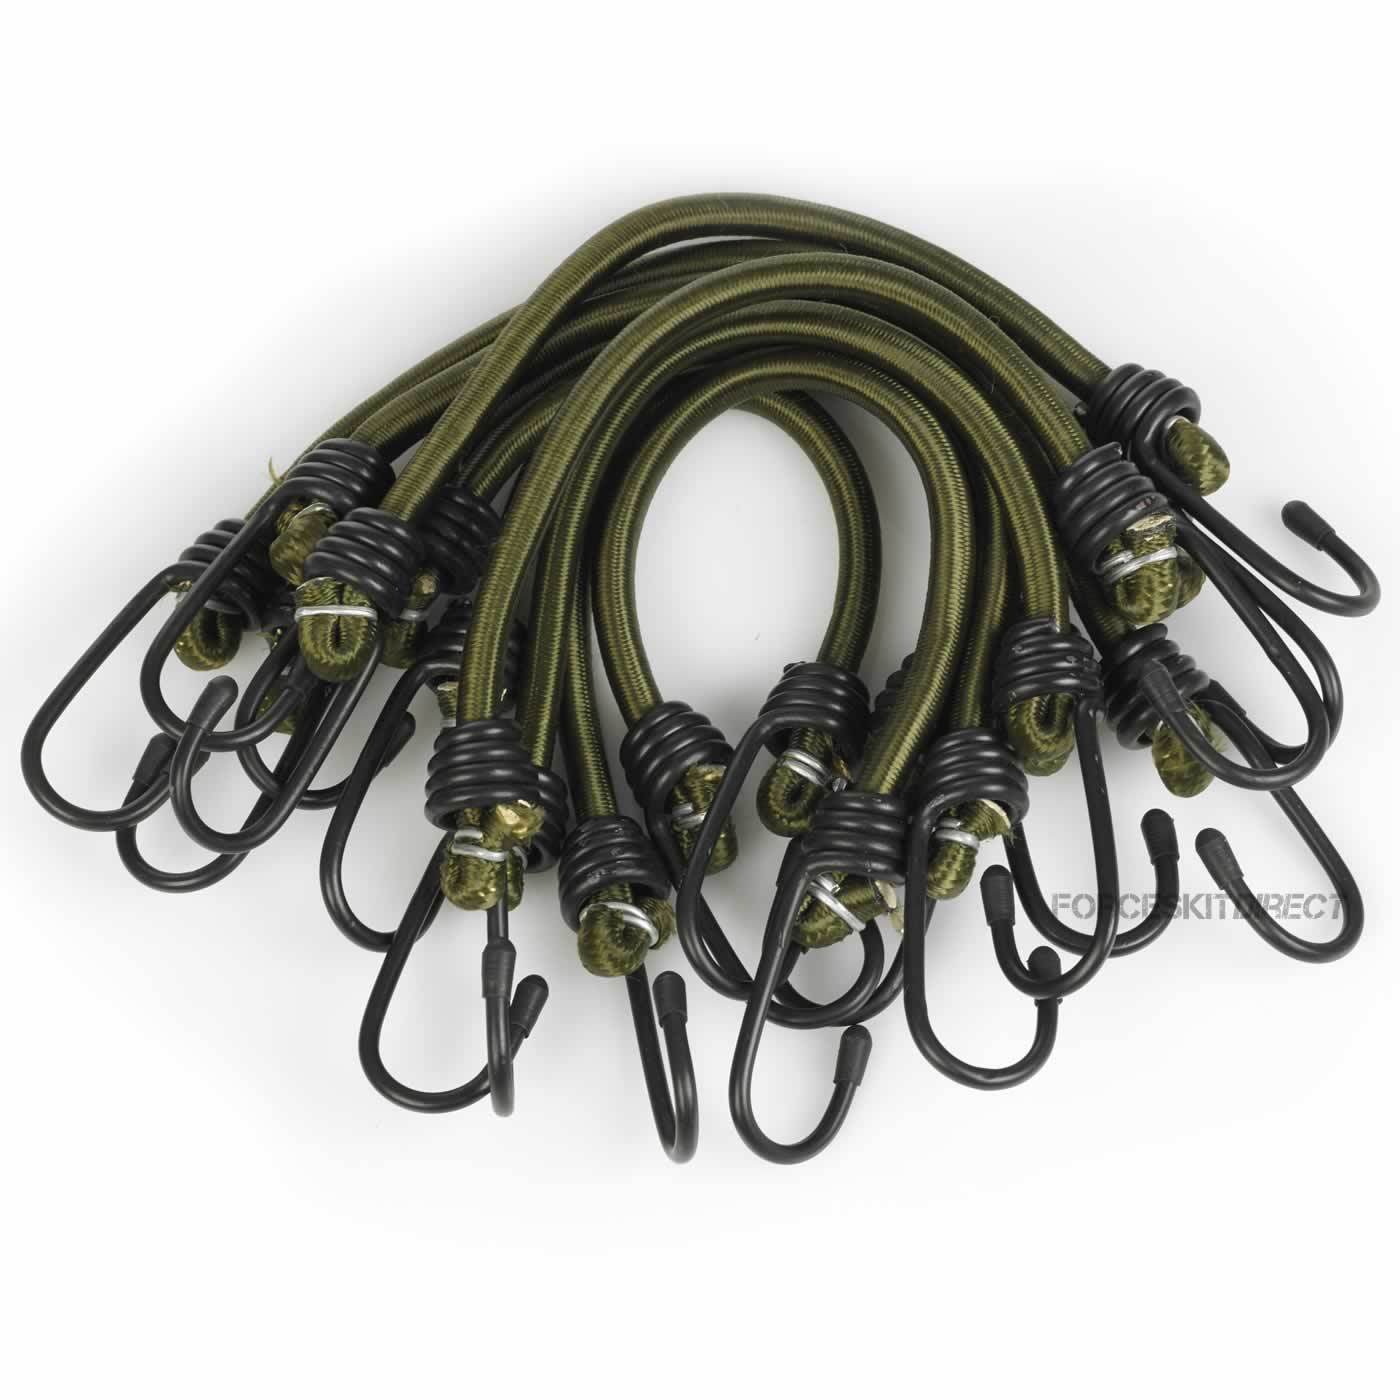 Elasticated Bungee Cords x 10 Military Bungees Army Basha Straps 12